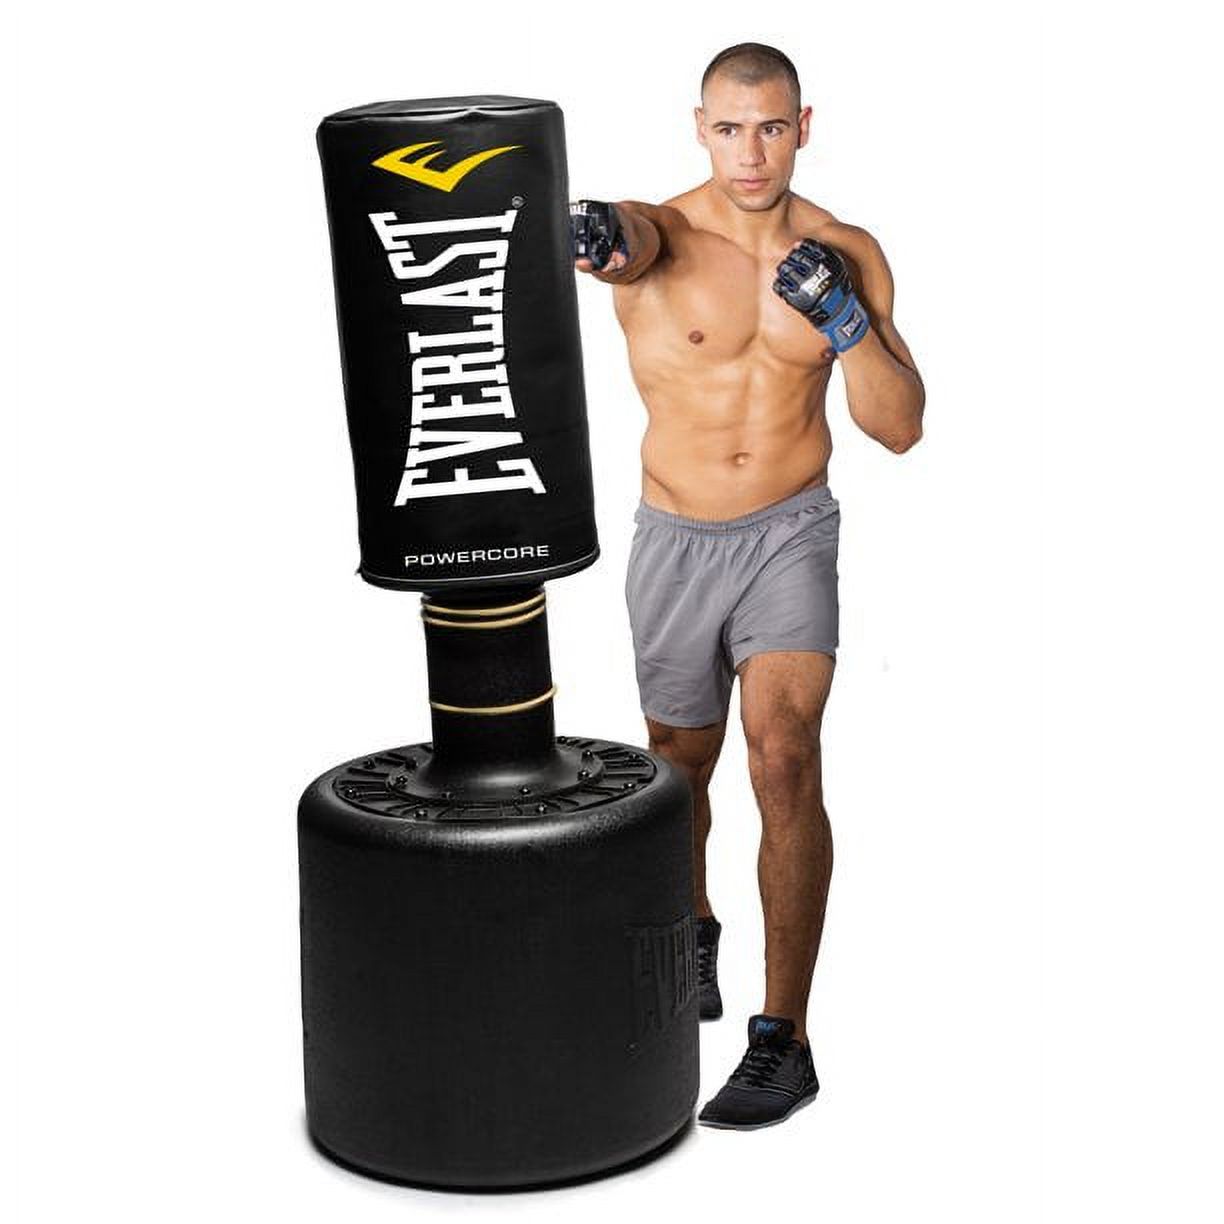 Everlast Powercore Free Standing Indoor Rounded Heavy Duty Fitness Training Bag - image 4 of 6